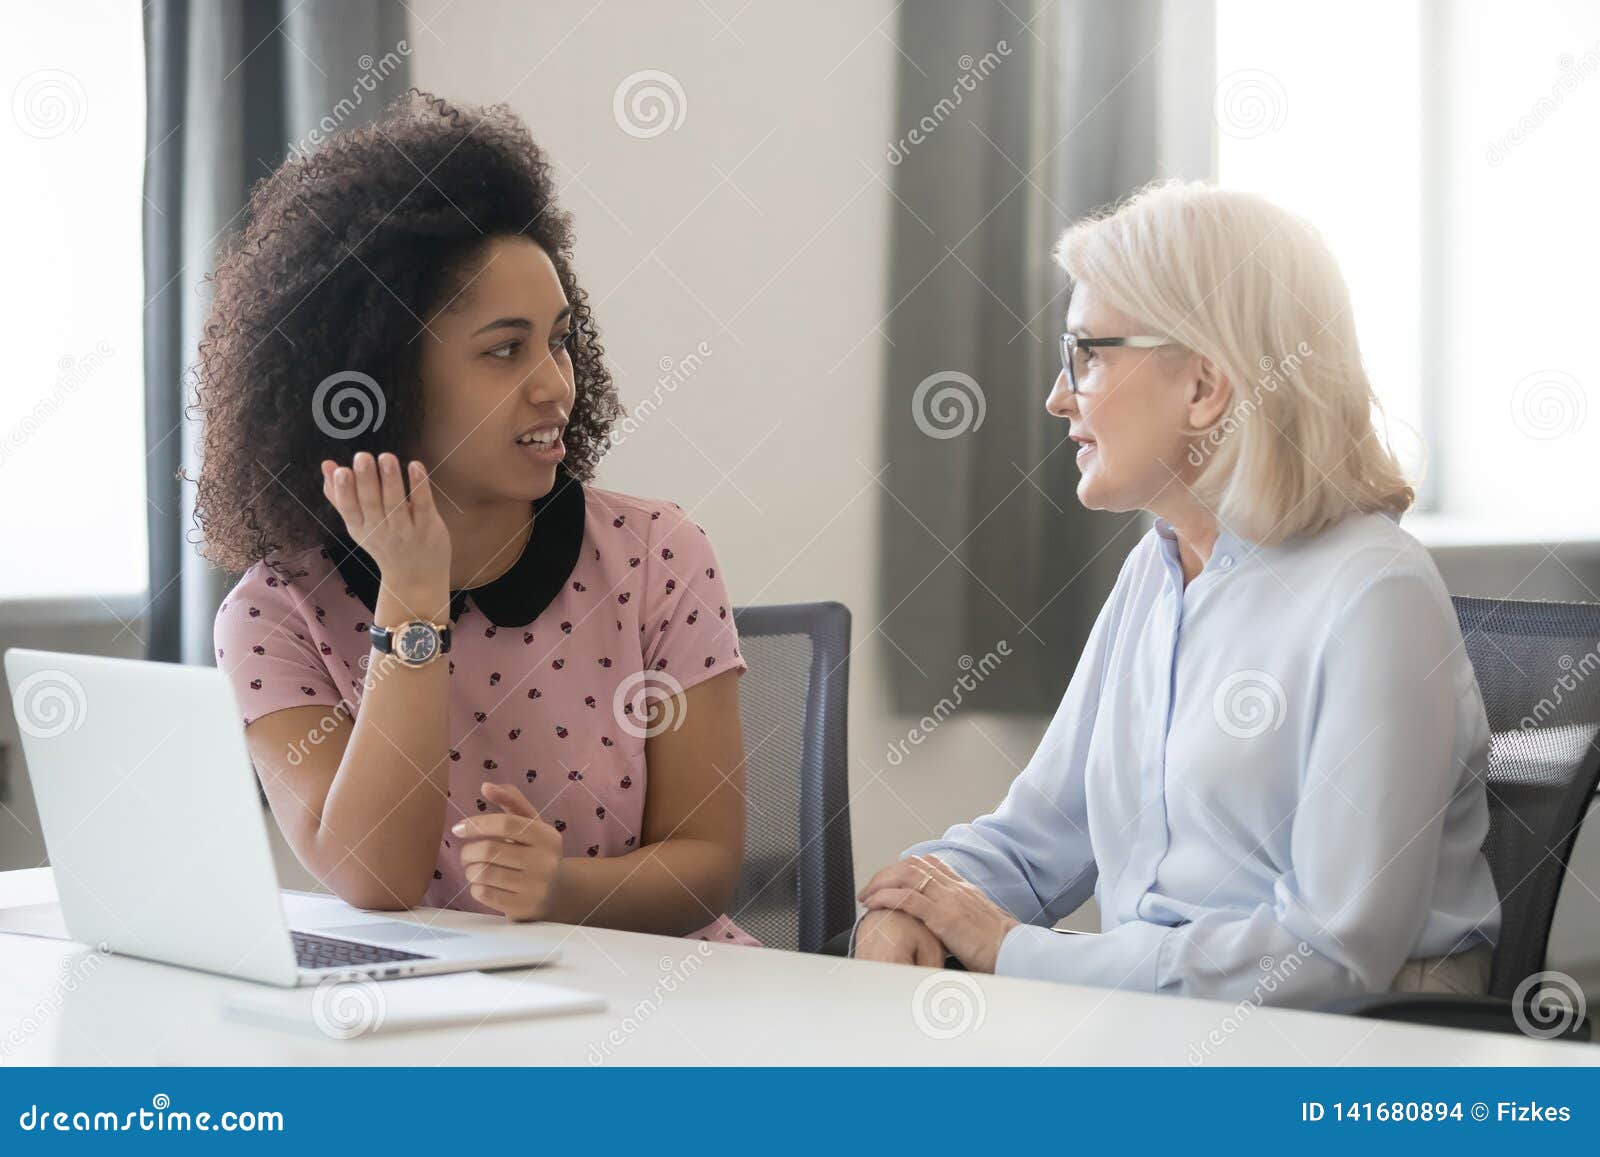 diverse old and young female colleagues talking at work